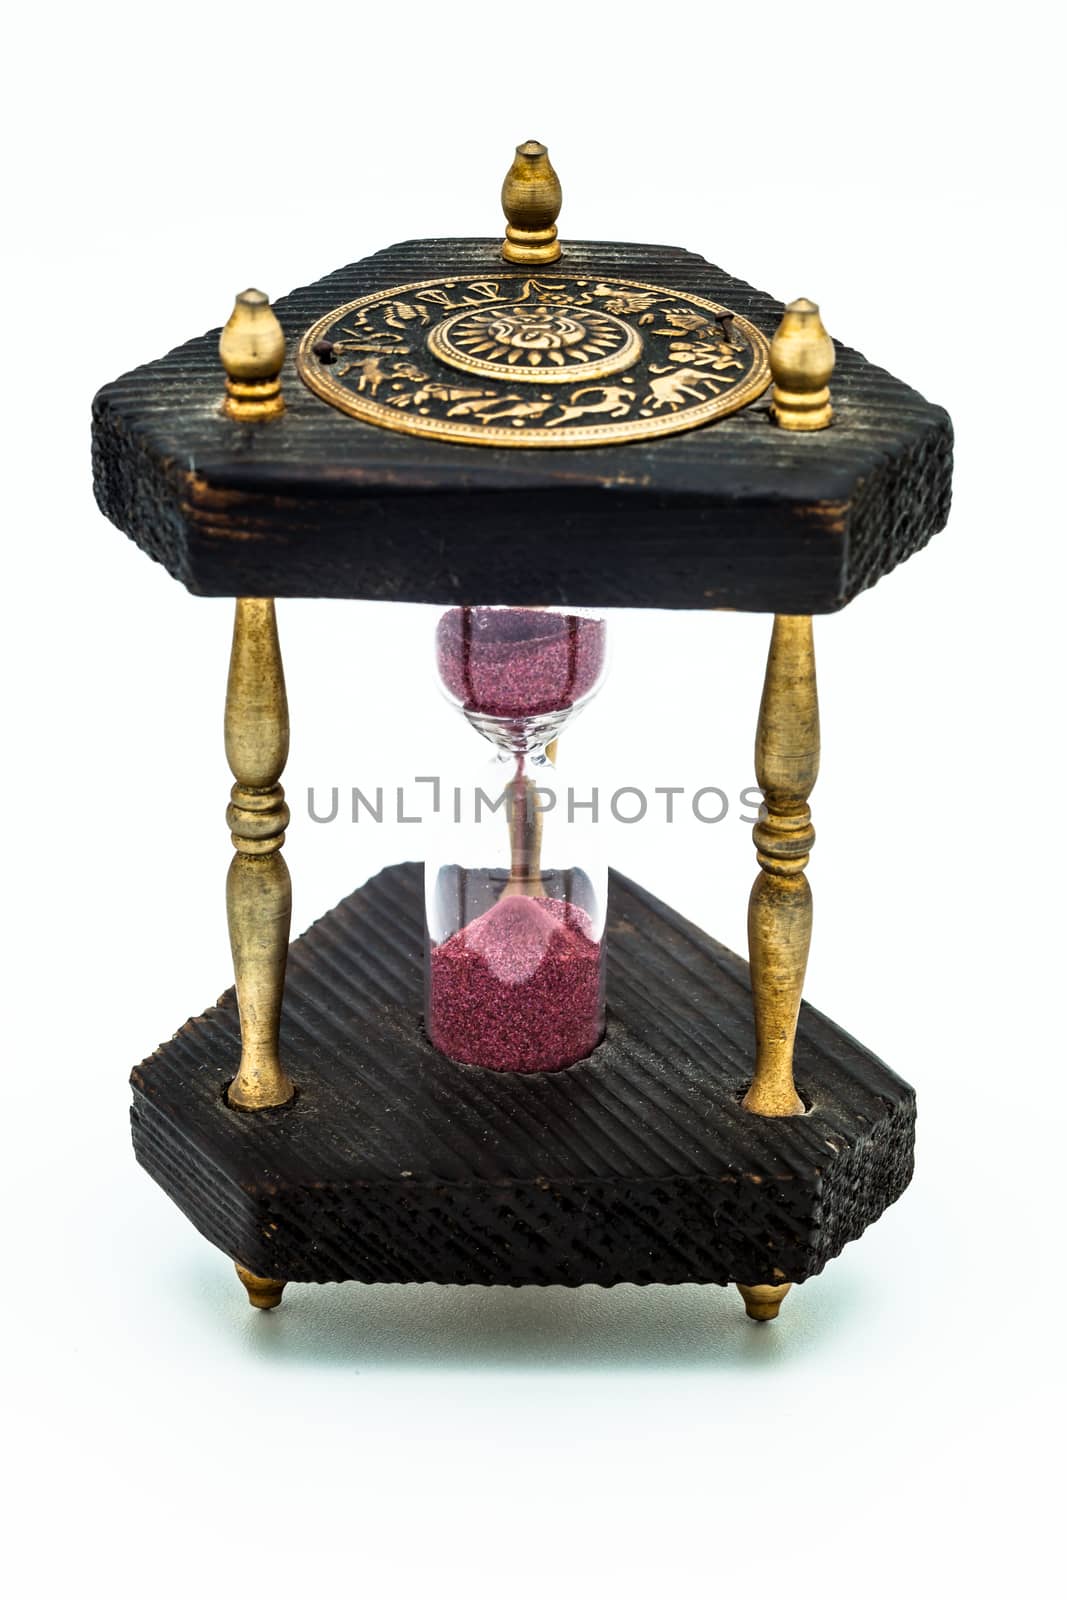 A wooden old sandglass isolated on white background